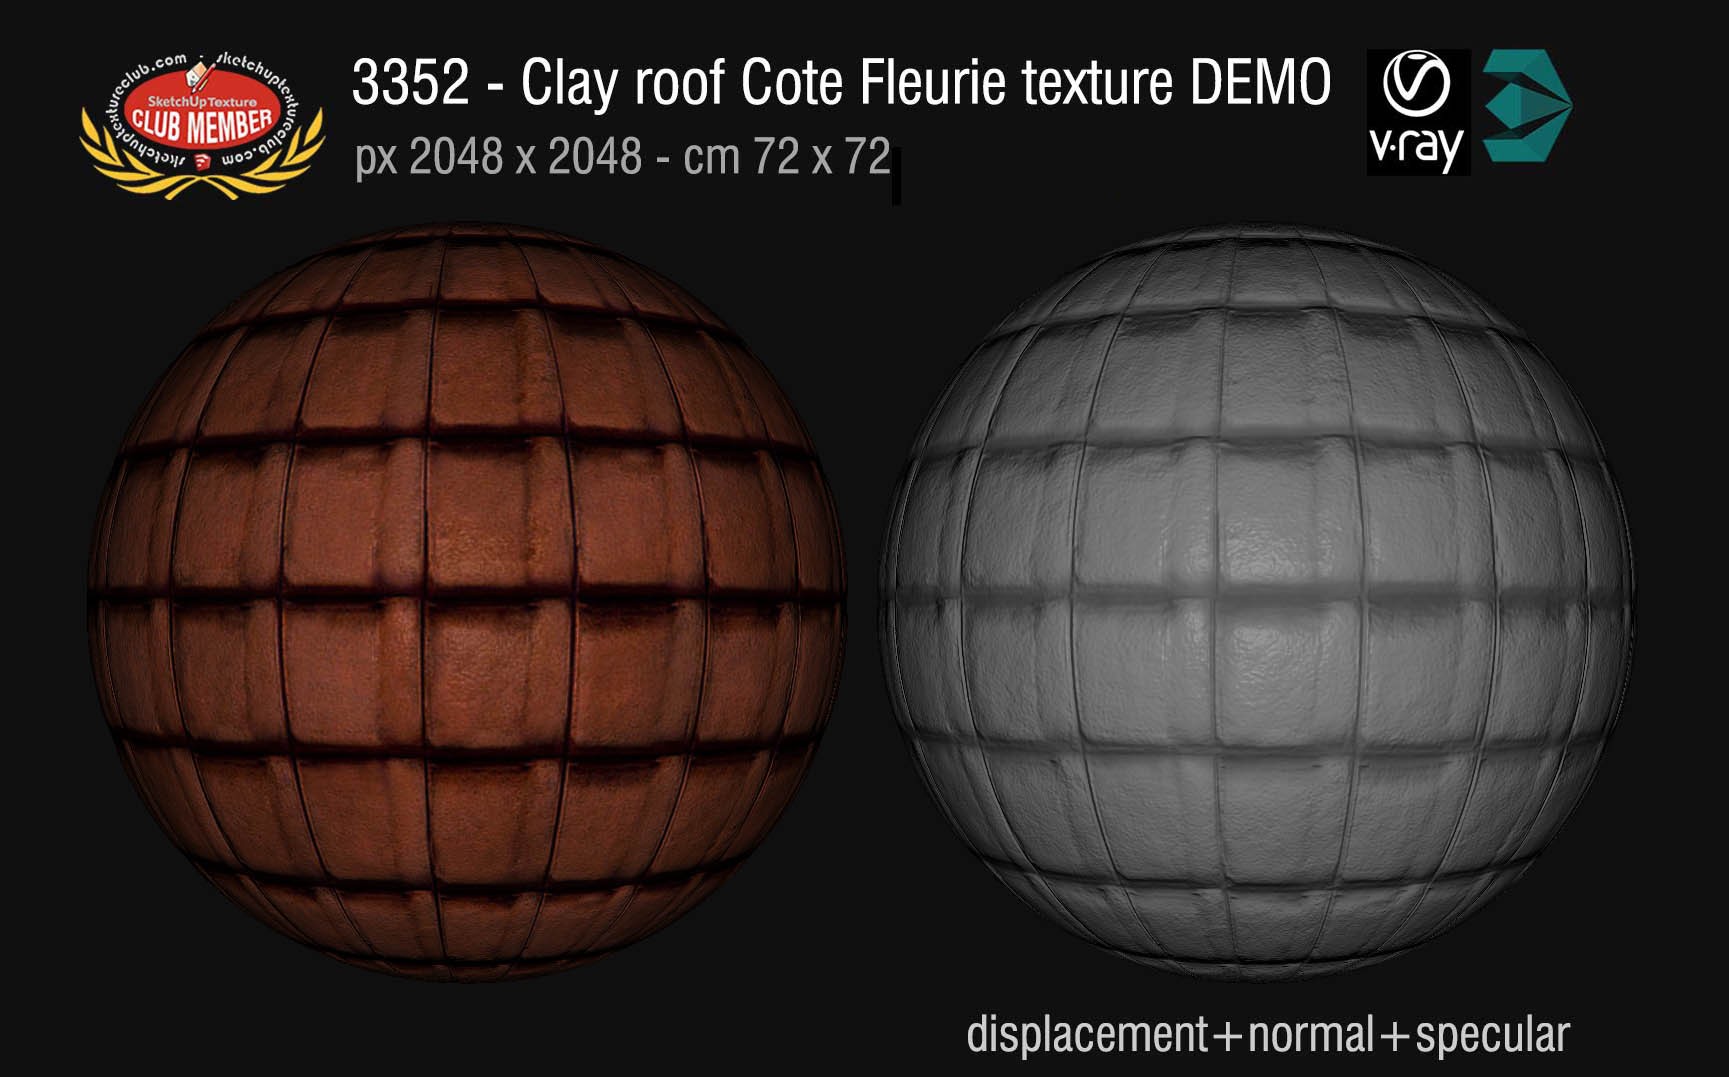 03352 Clay roofing Cote Fleurie texture + maps DEMO